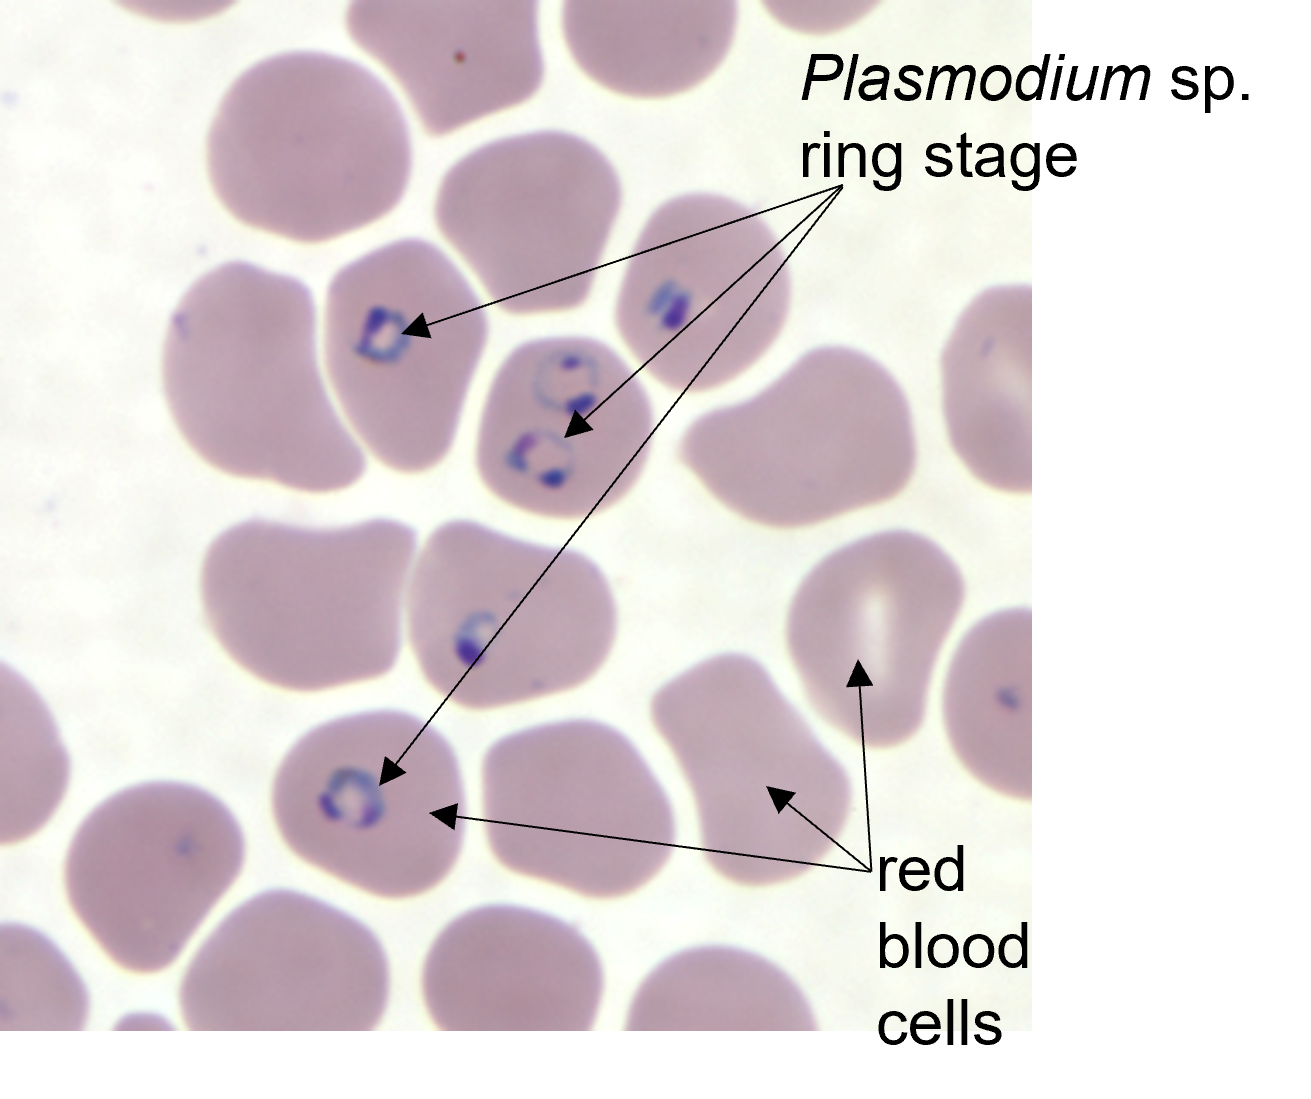 ring stage of Plasmodium inside of red blood cells in this microscopic image of infected human blood